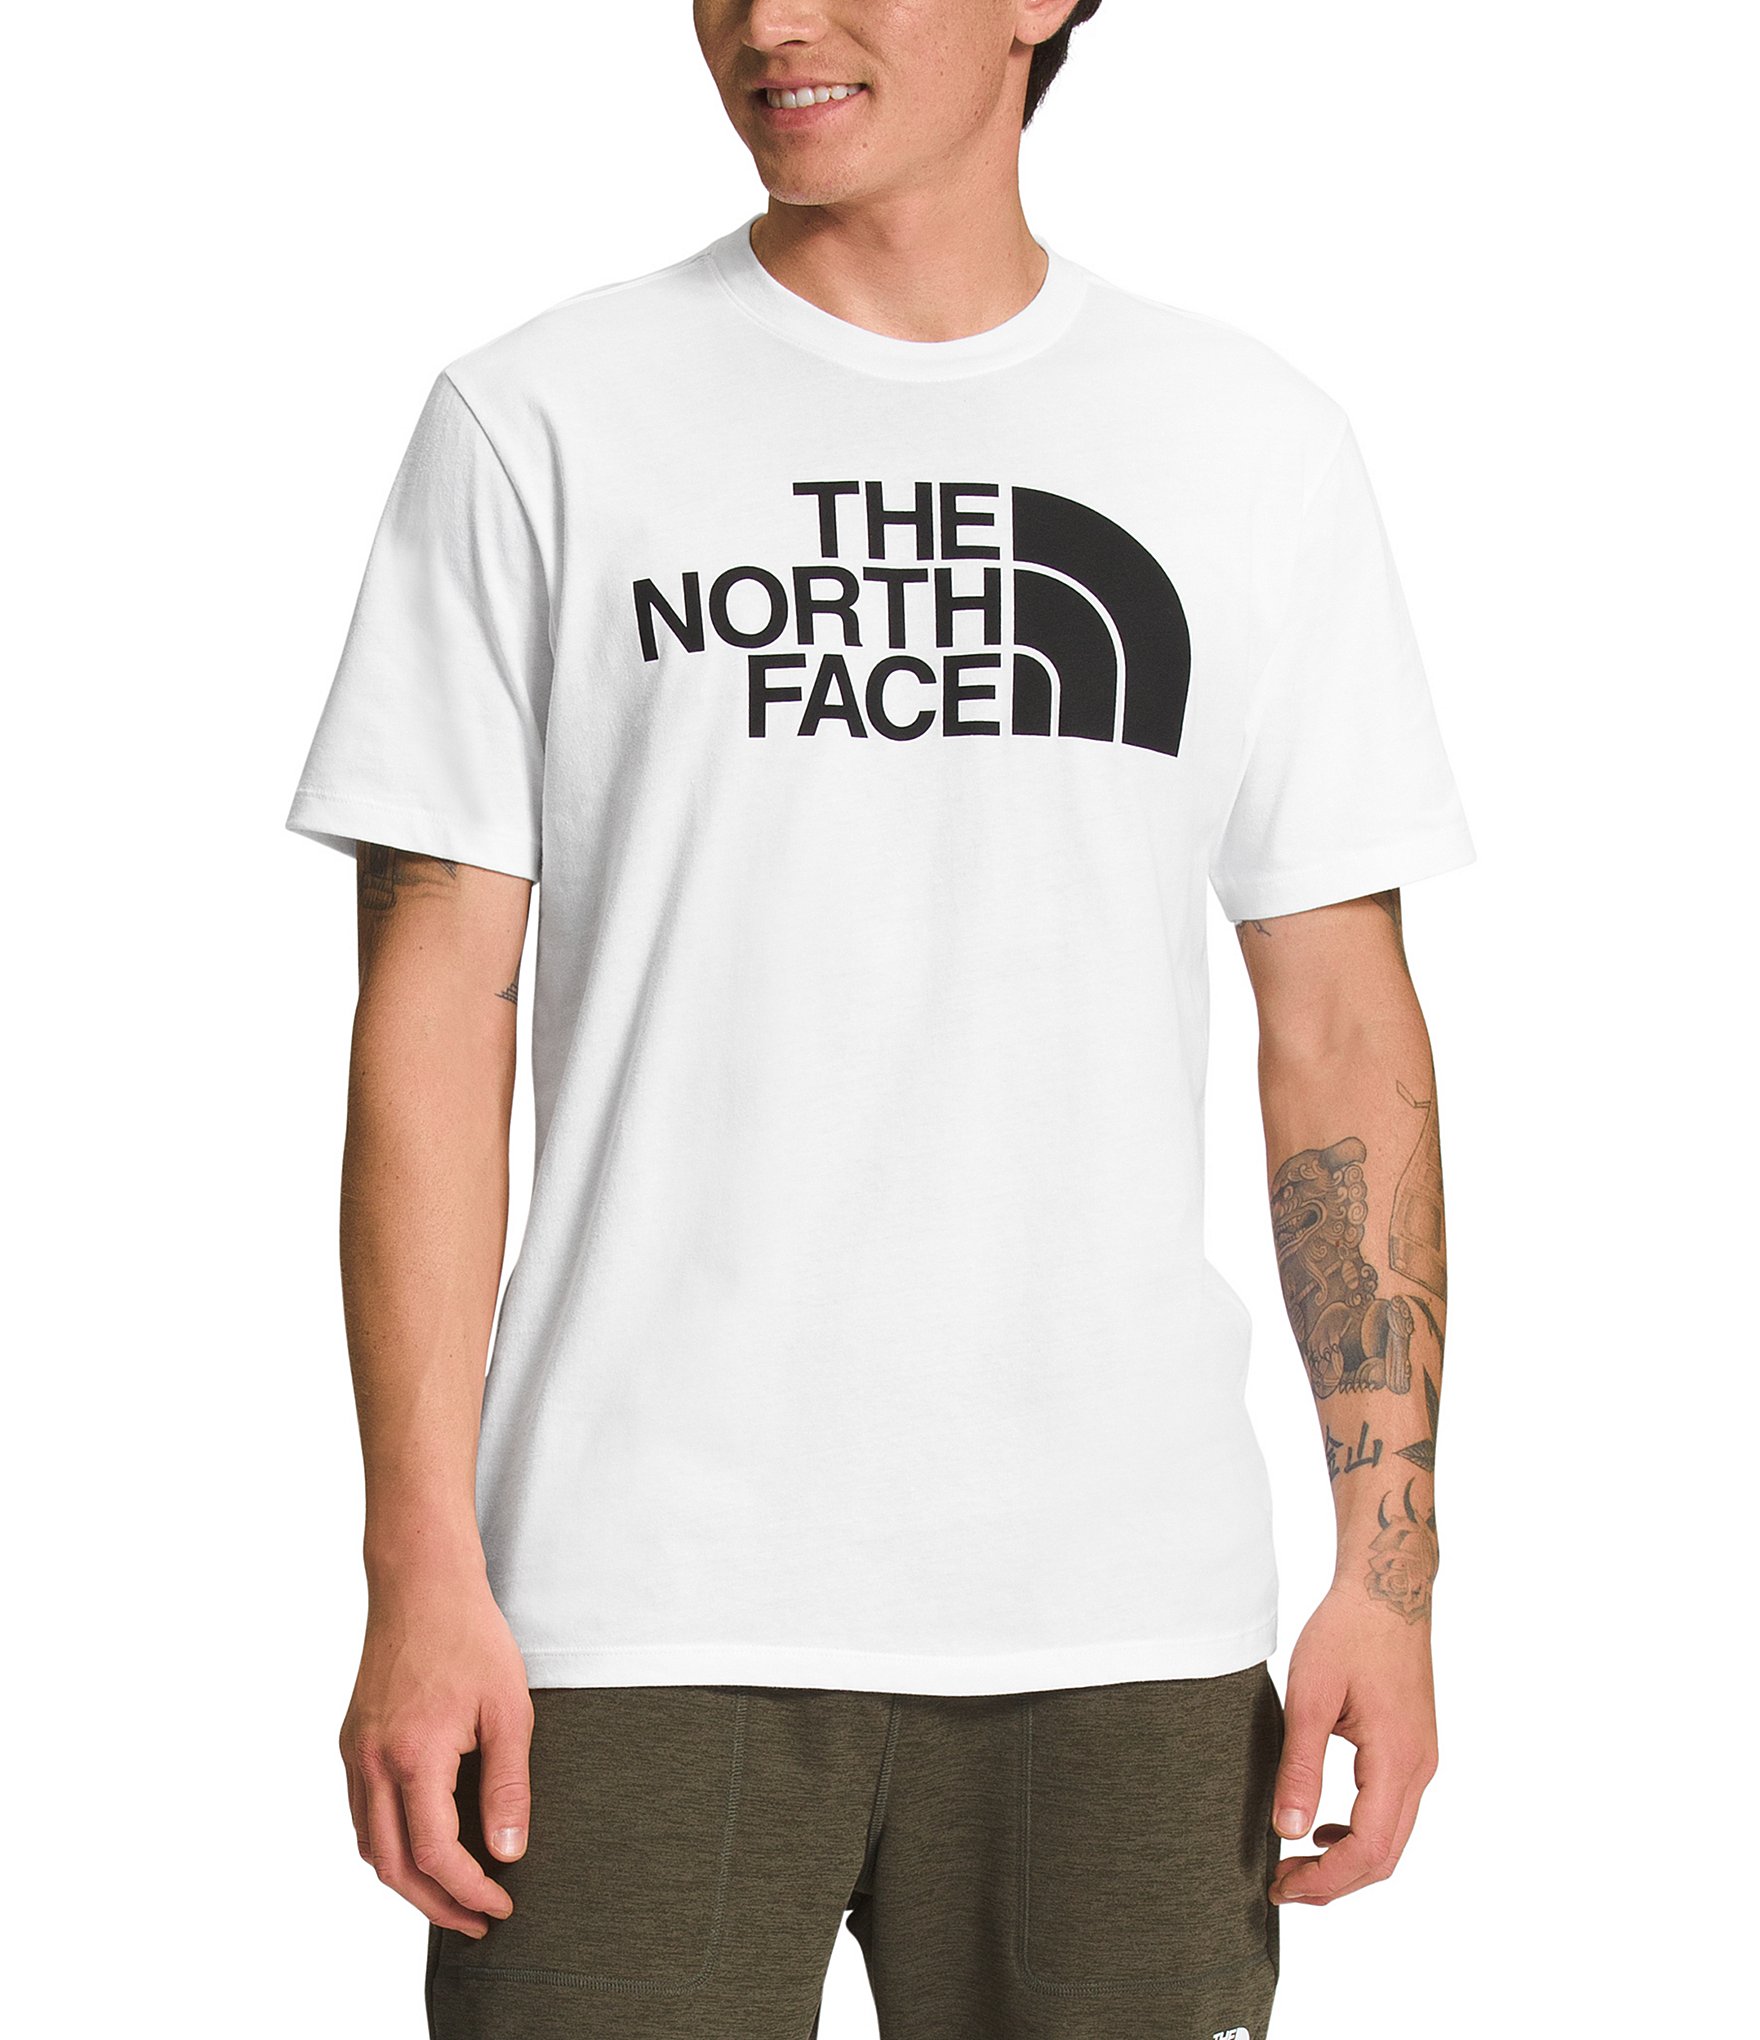 The North Face Men's Tee Shirts